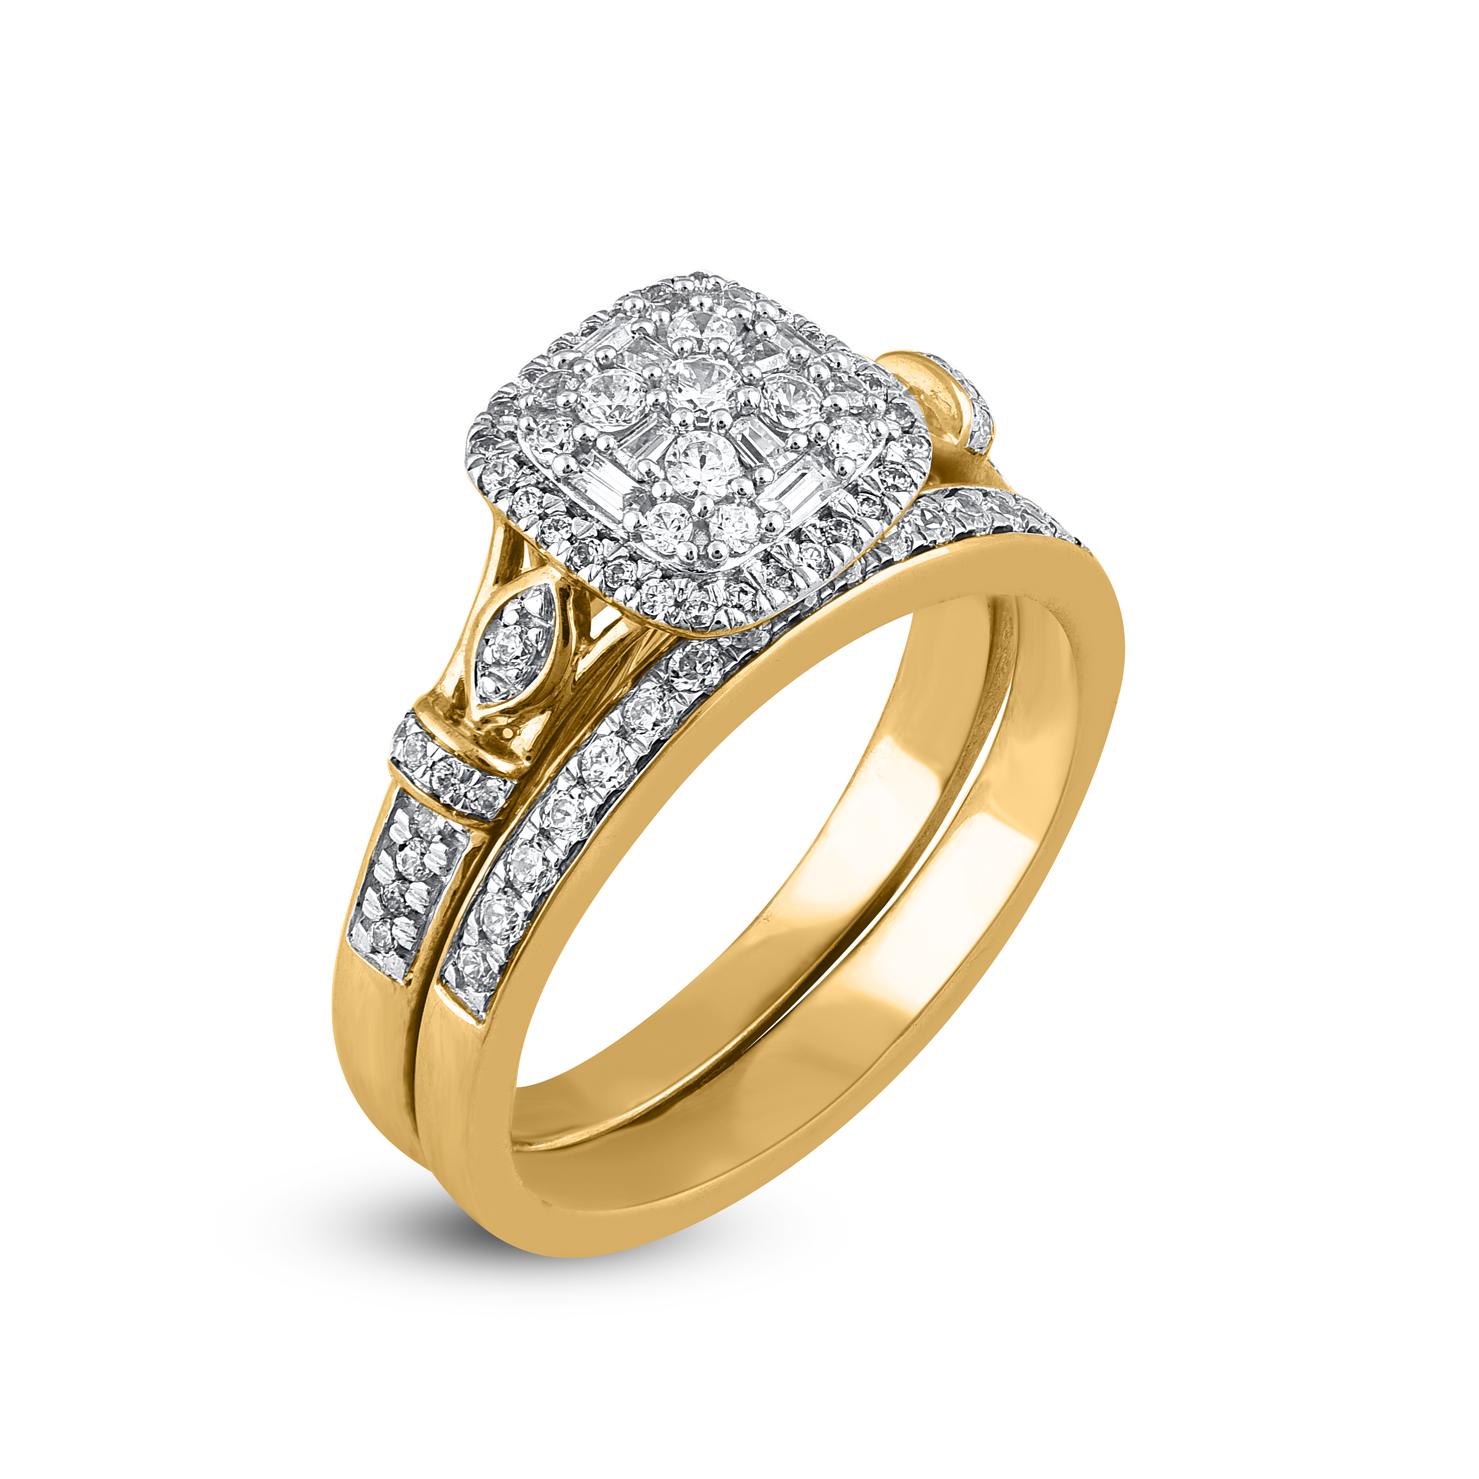 Contemporary TJD 0.50 Carat Round and Baguette Cut Diamond 14KT Yellow Gold Halo Wedding Ring For Sale